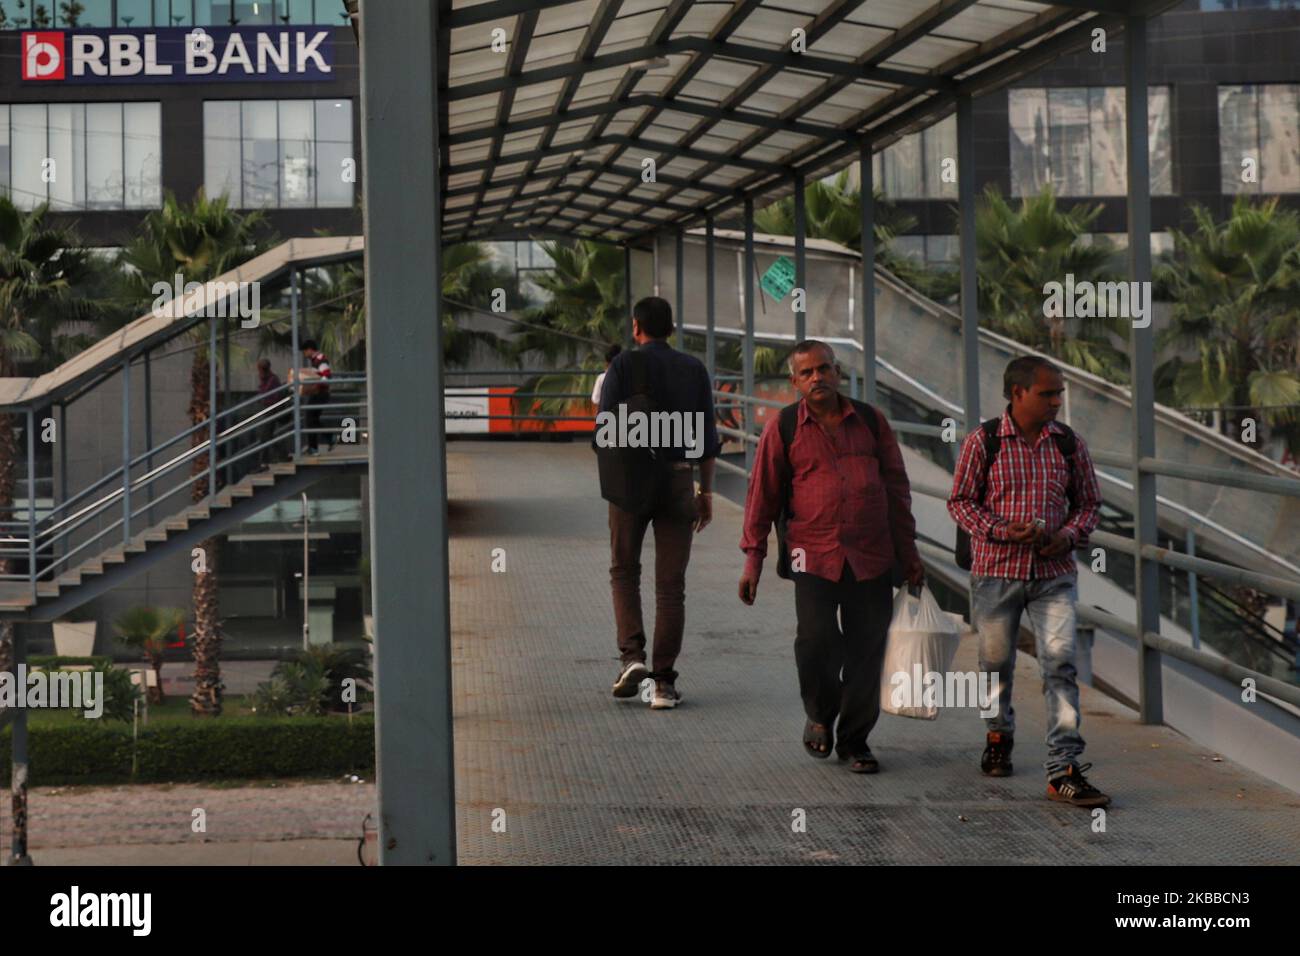 Indian men walk over a Foot over bridge with RBL Bank board installed at a branch in Gurugram on the outskirts of New Delhi India on 22 November 2019 (Photo by Nasir Kachroo/NurPhoto) Stock Photo